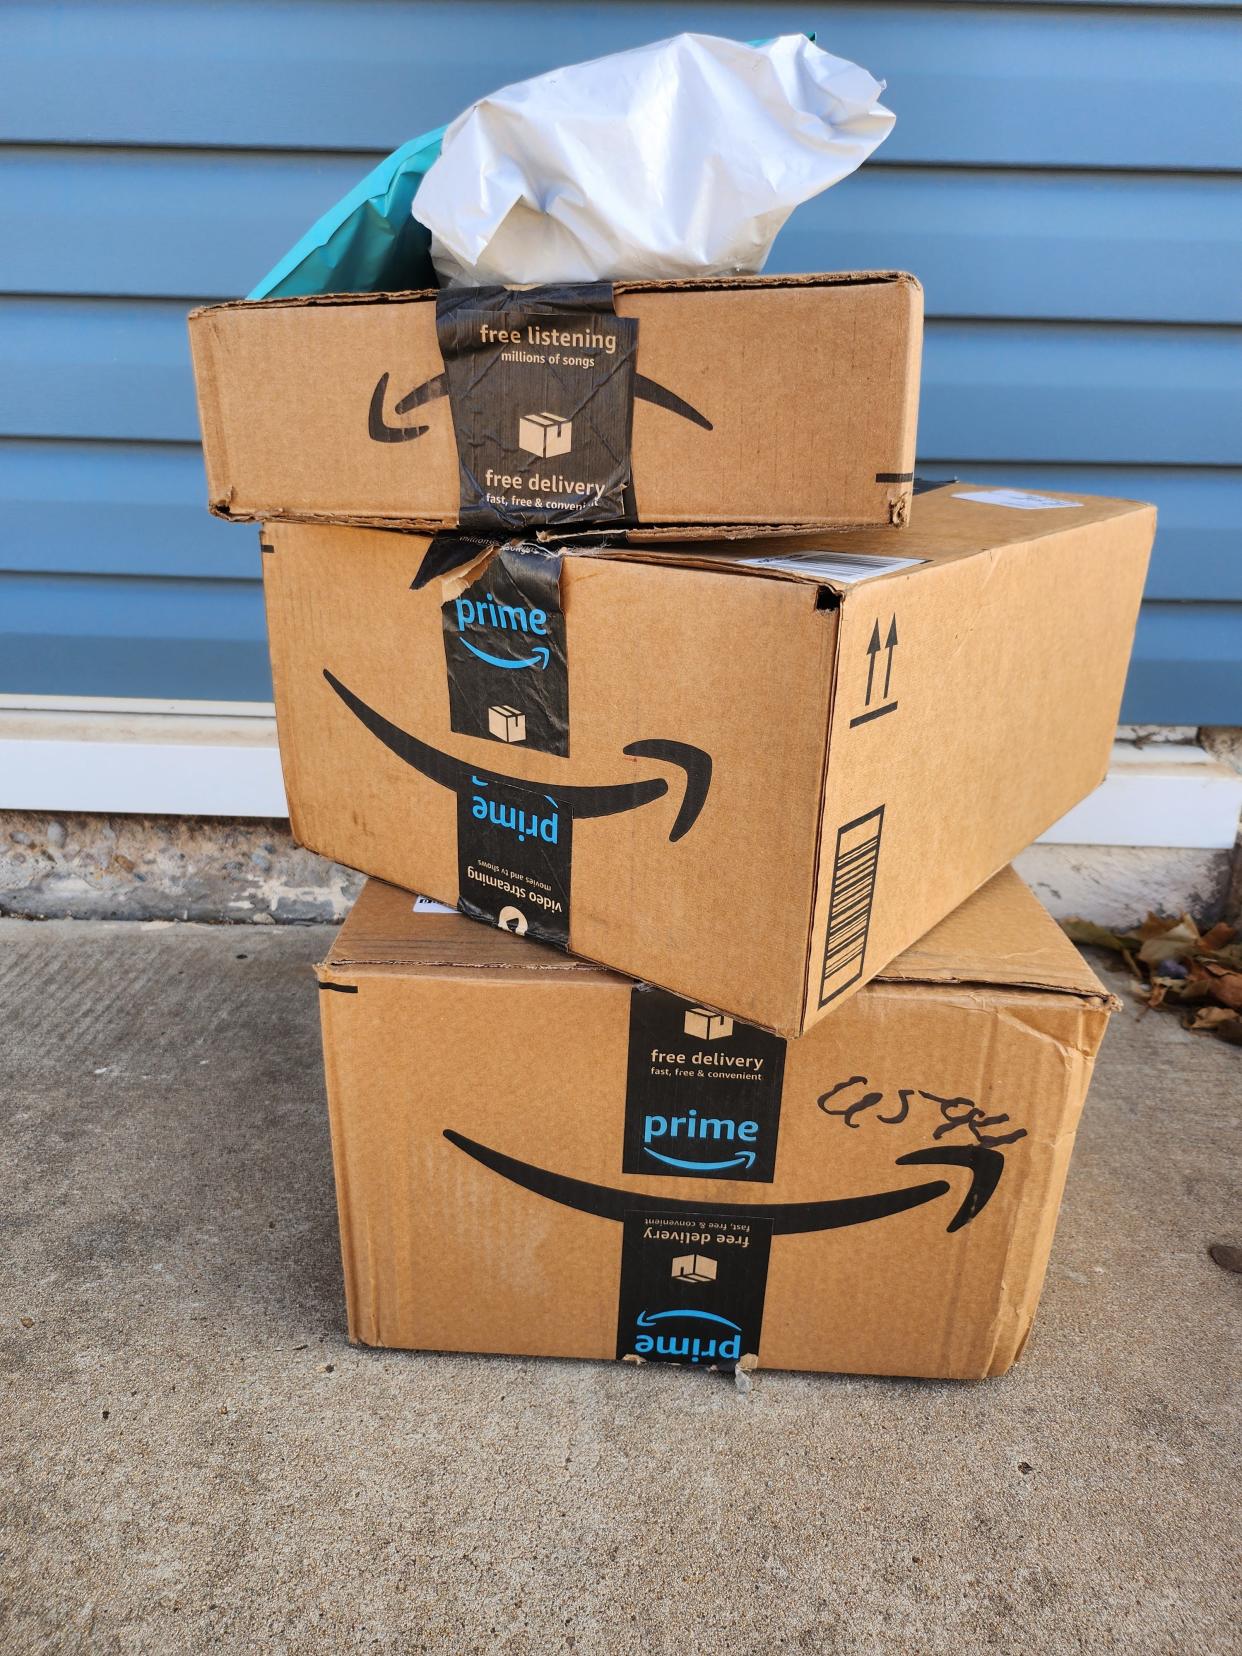 As packages are delivered this holiday season, the Amarillo community is urged to be wary of porch pirates targeting your packages this holiday season.